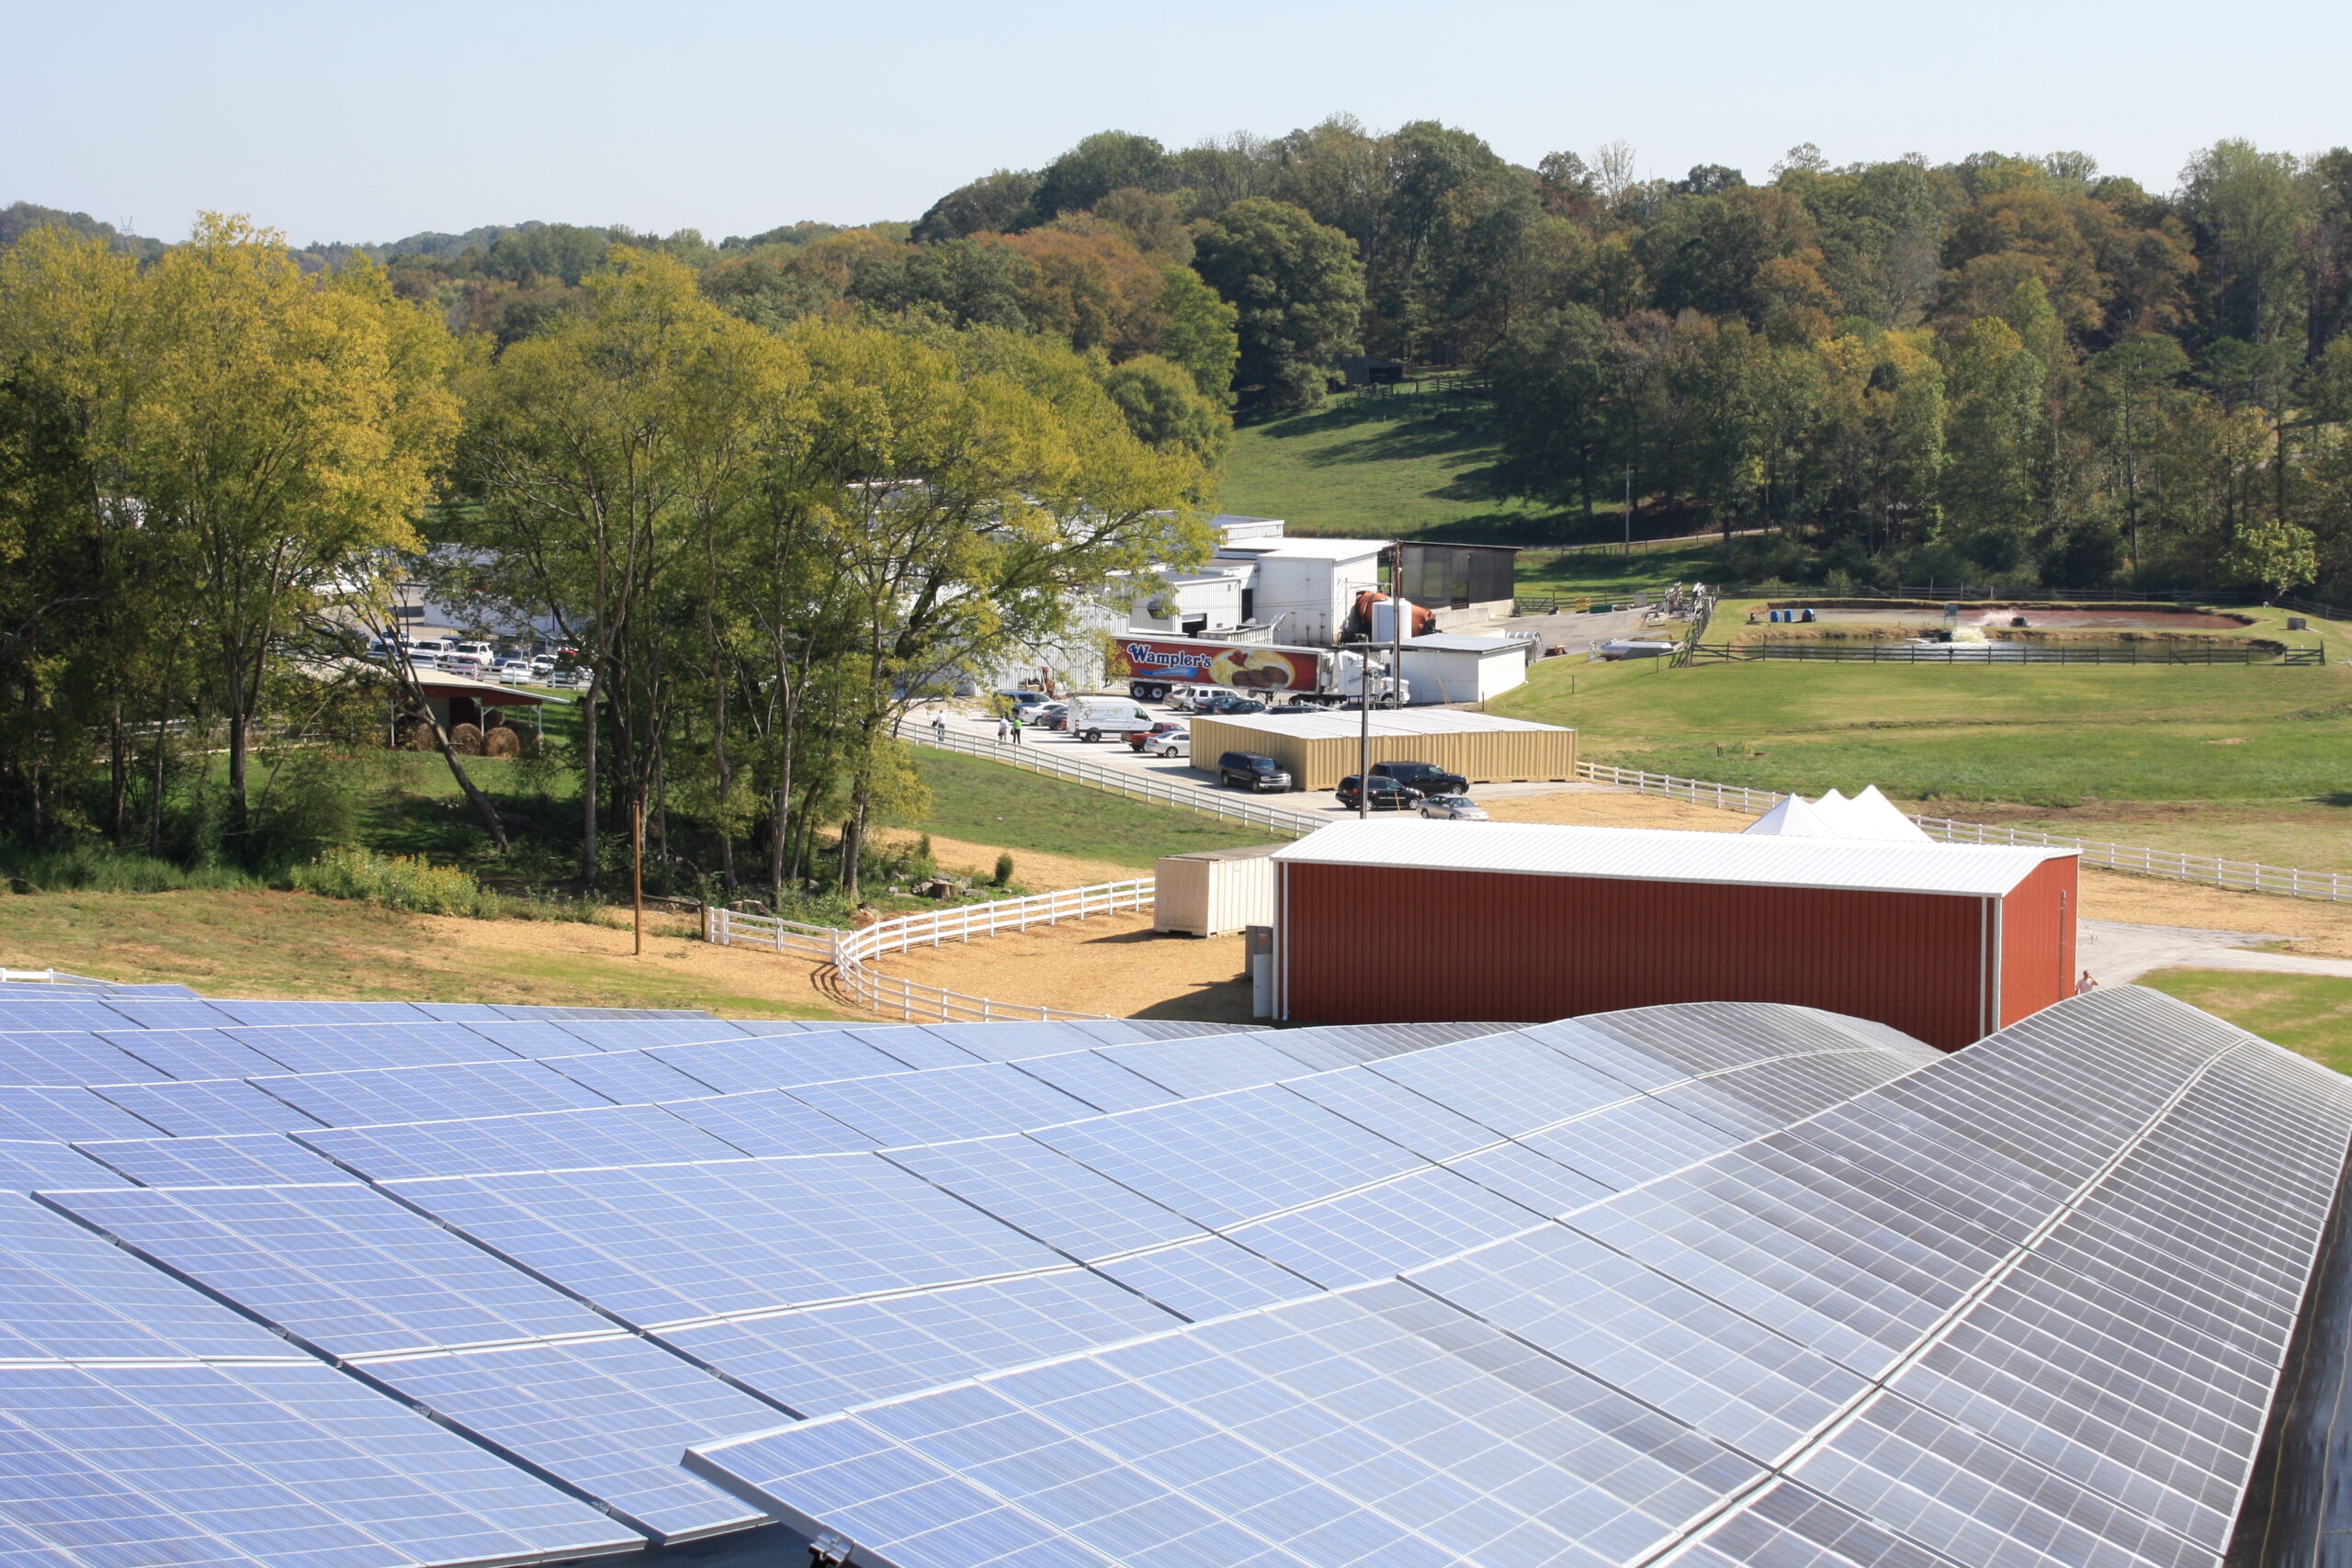 Featured image for “Wampler’s Solar Installation”